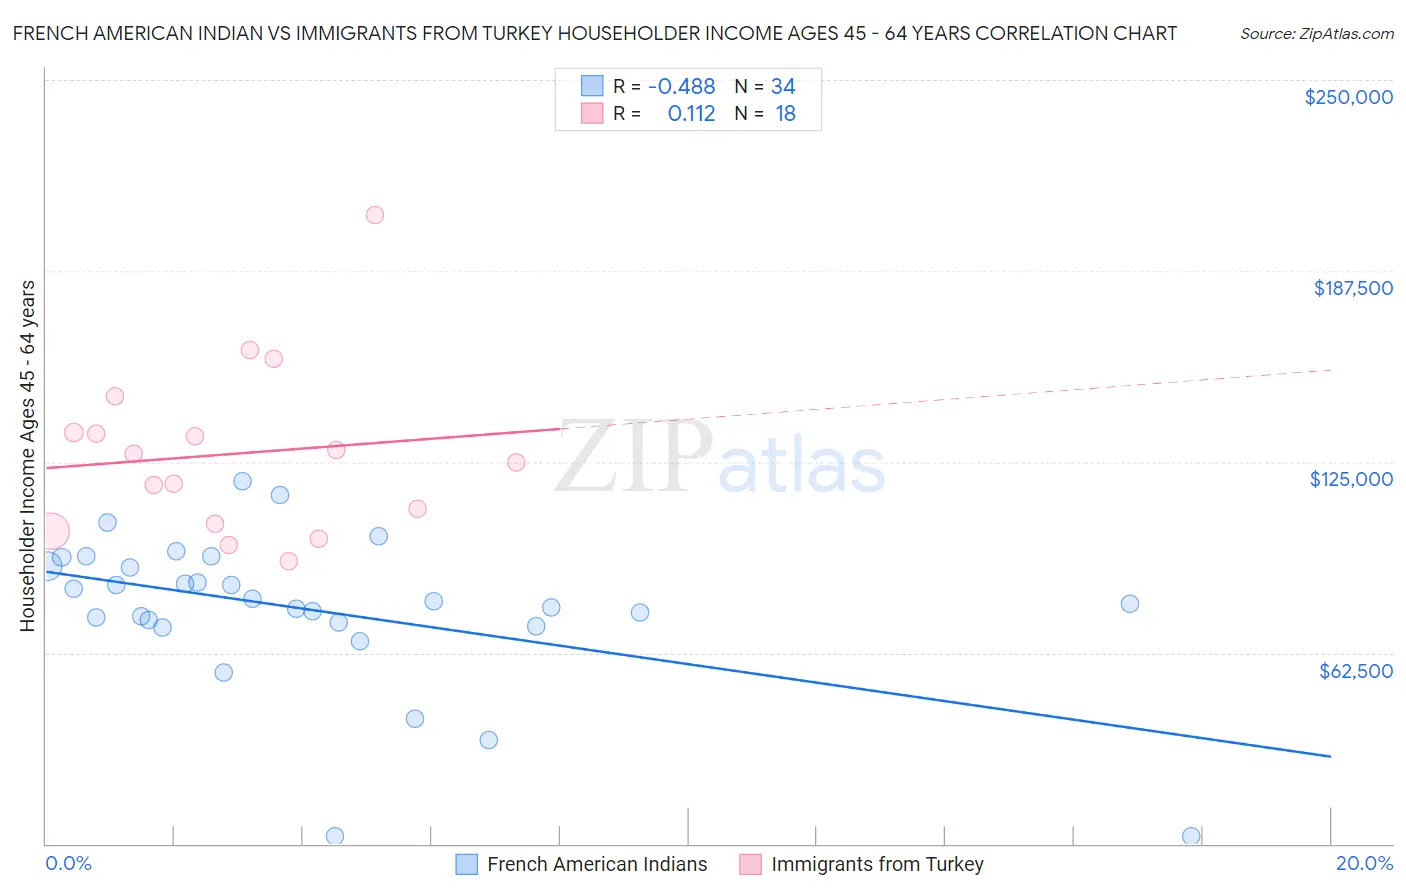 French American Indian vs Immigrants from Turkey Householder Income Ages 45 - 64 years